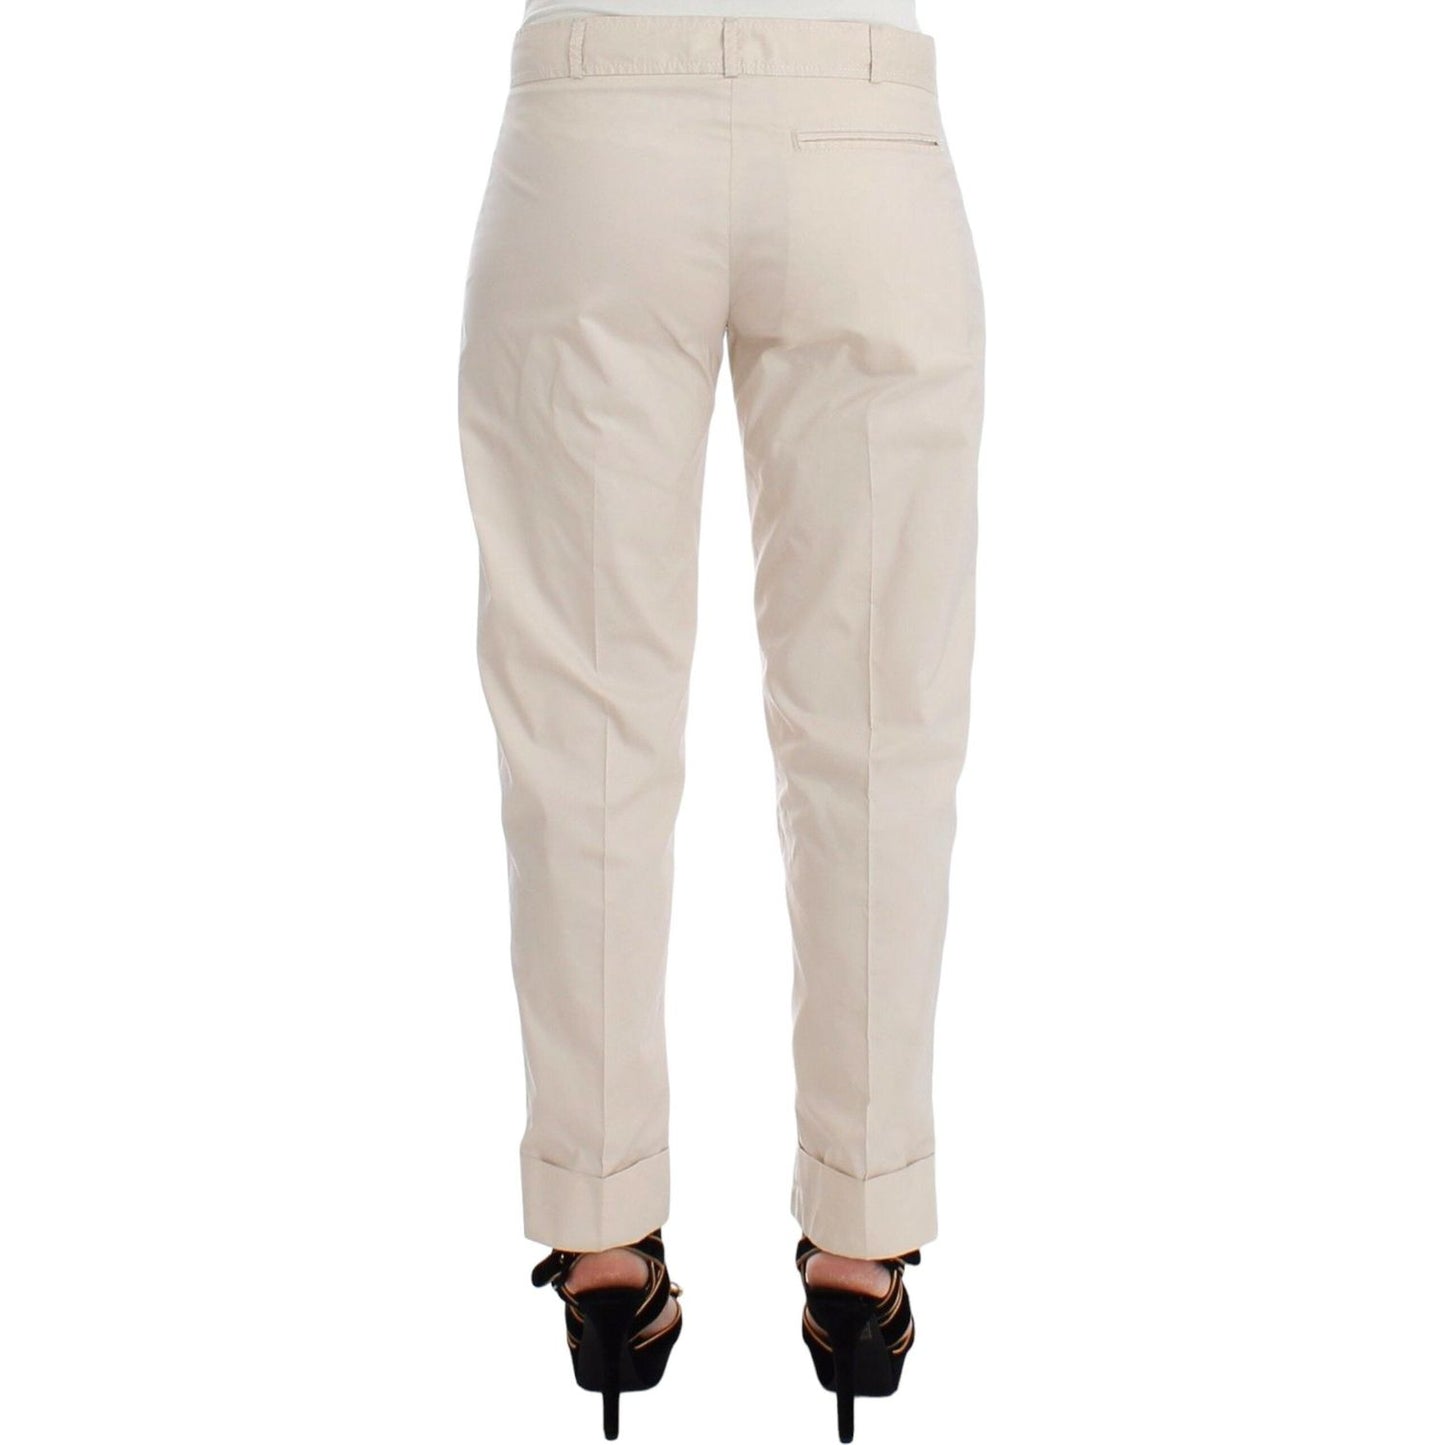 Ermanno Scervino Chic Beige Chino Pants - Elegance Redefined Jeans & Pants beige-chinos-casual-dress-pants-khakis